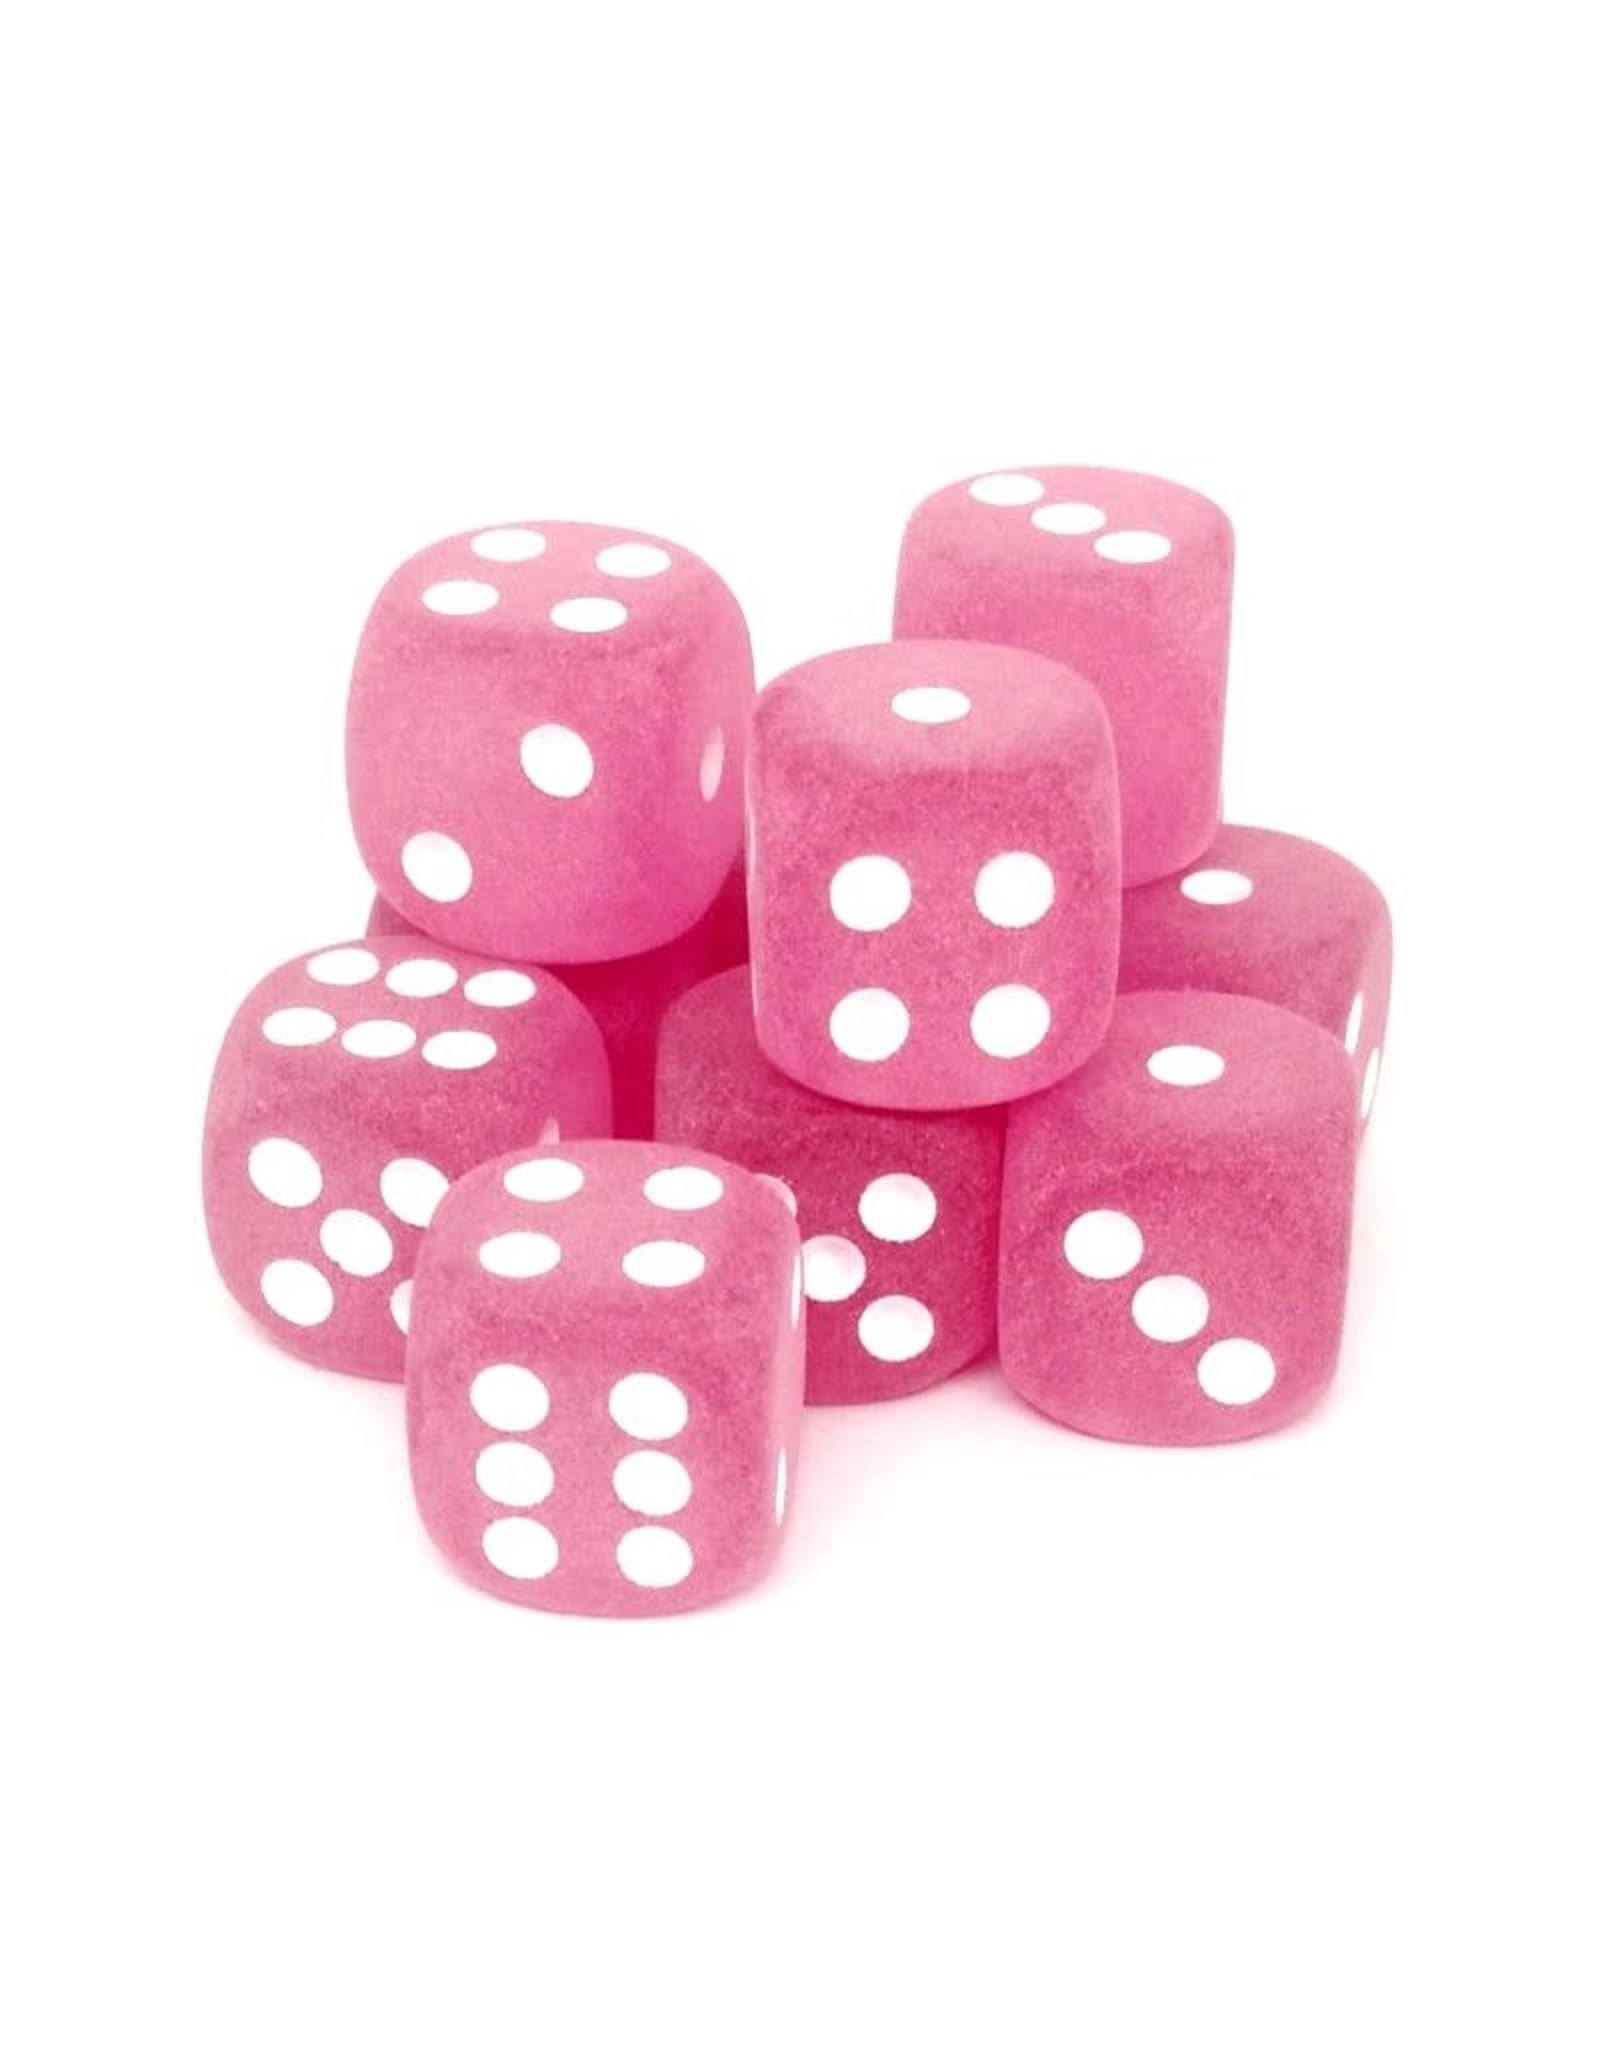 (S/O) 16mm D6 Dice Block: Frosted Pink w/White